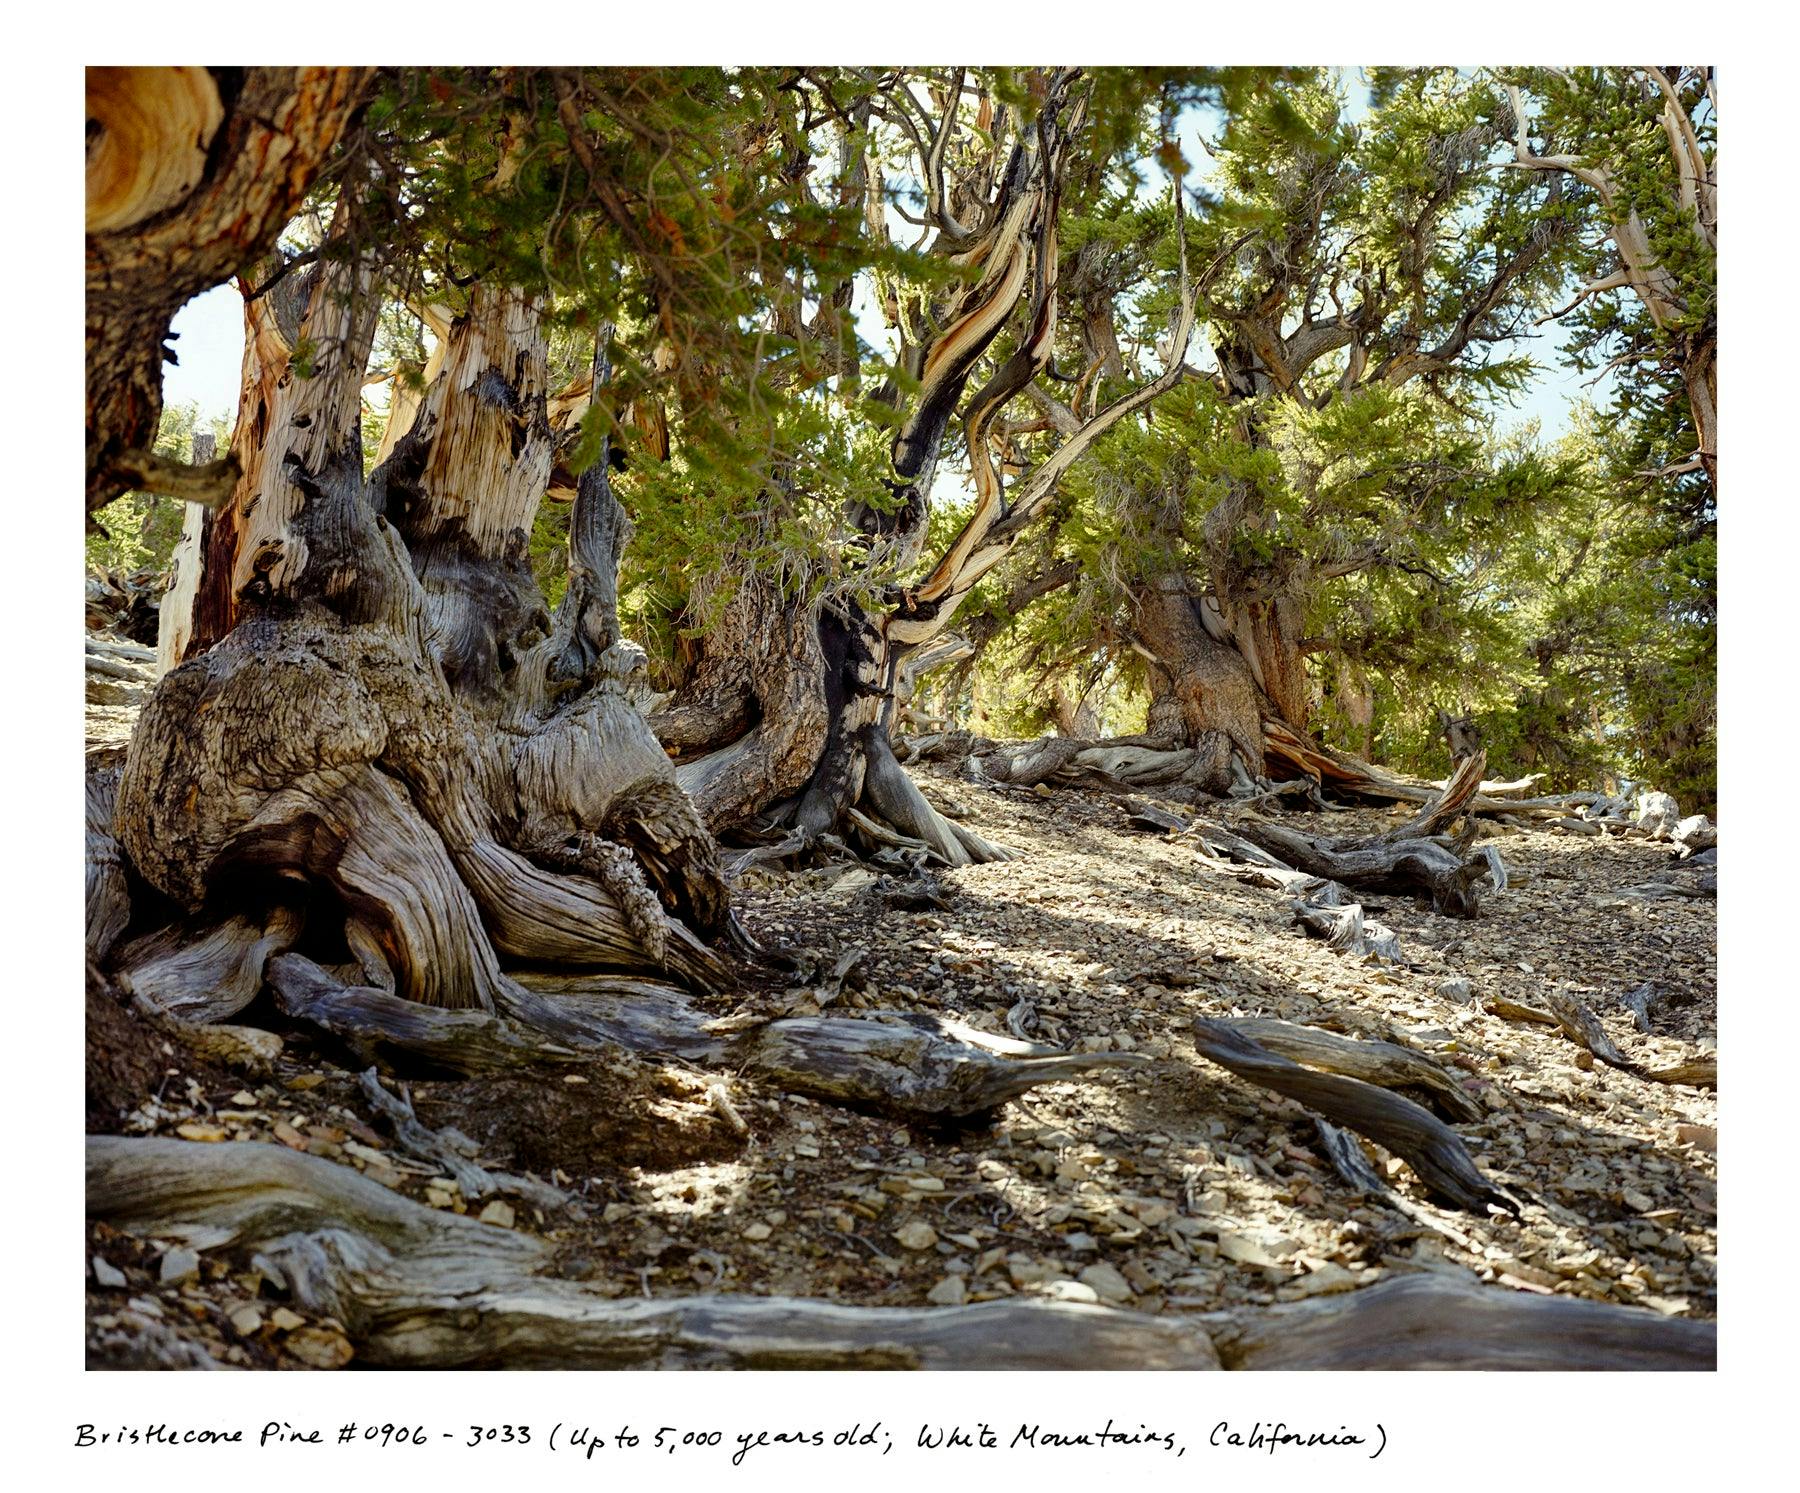 Photography by Rachel Sussman titled "Bristlecone Pine #0906-3033 (Up to 5,000 years old; White Mountains, California)".